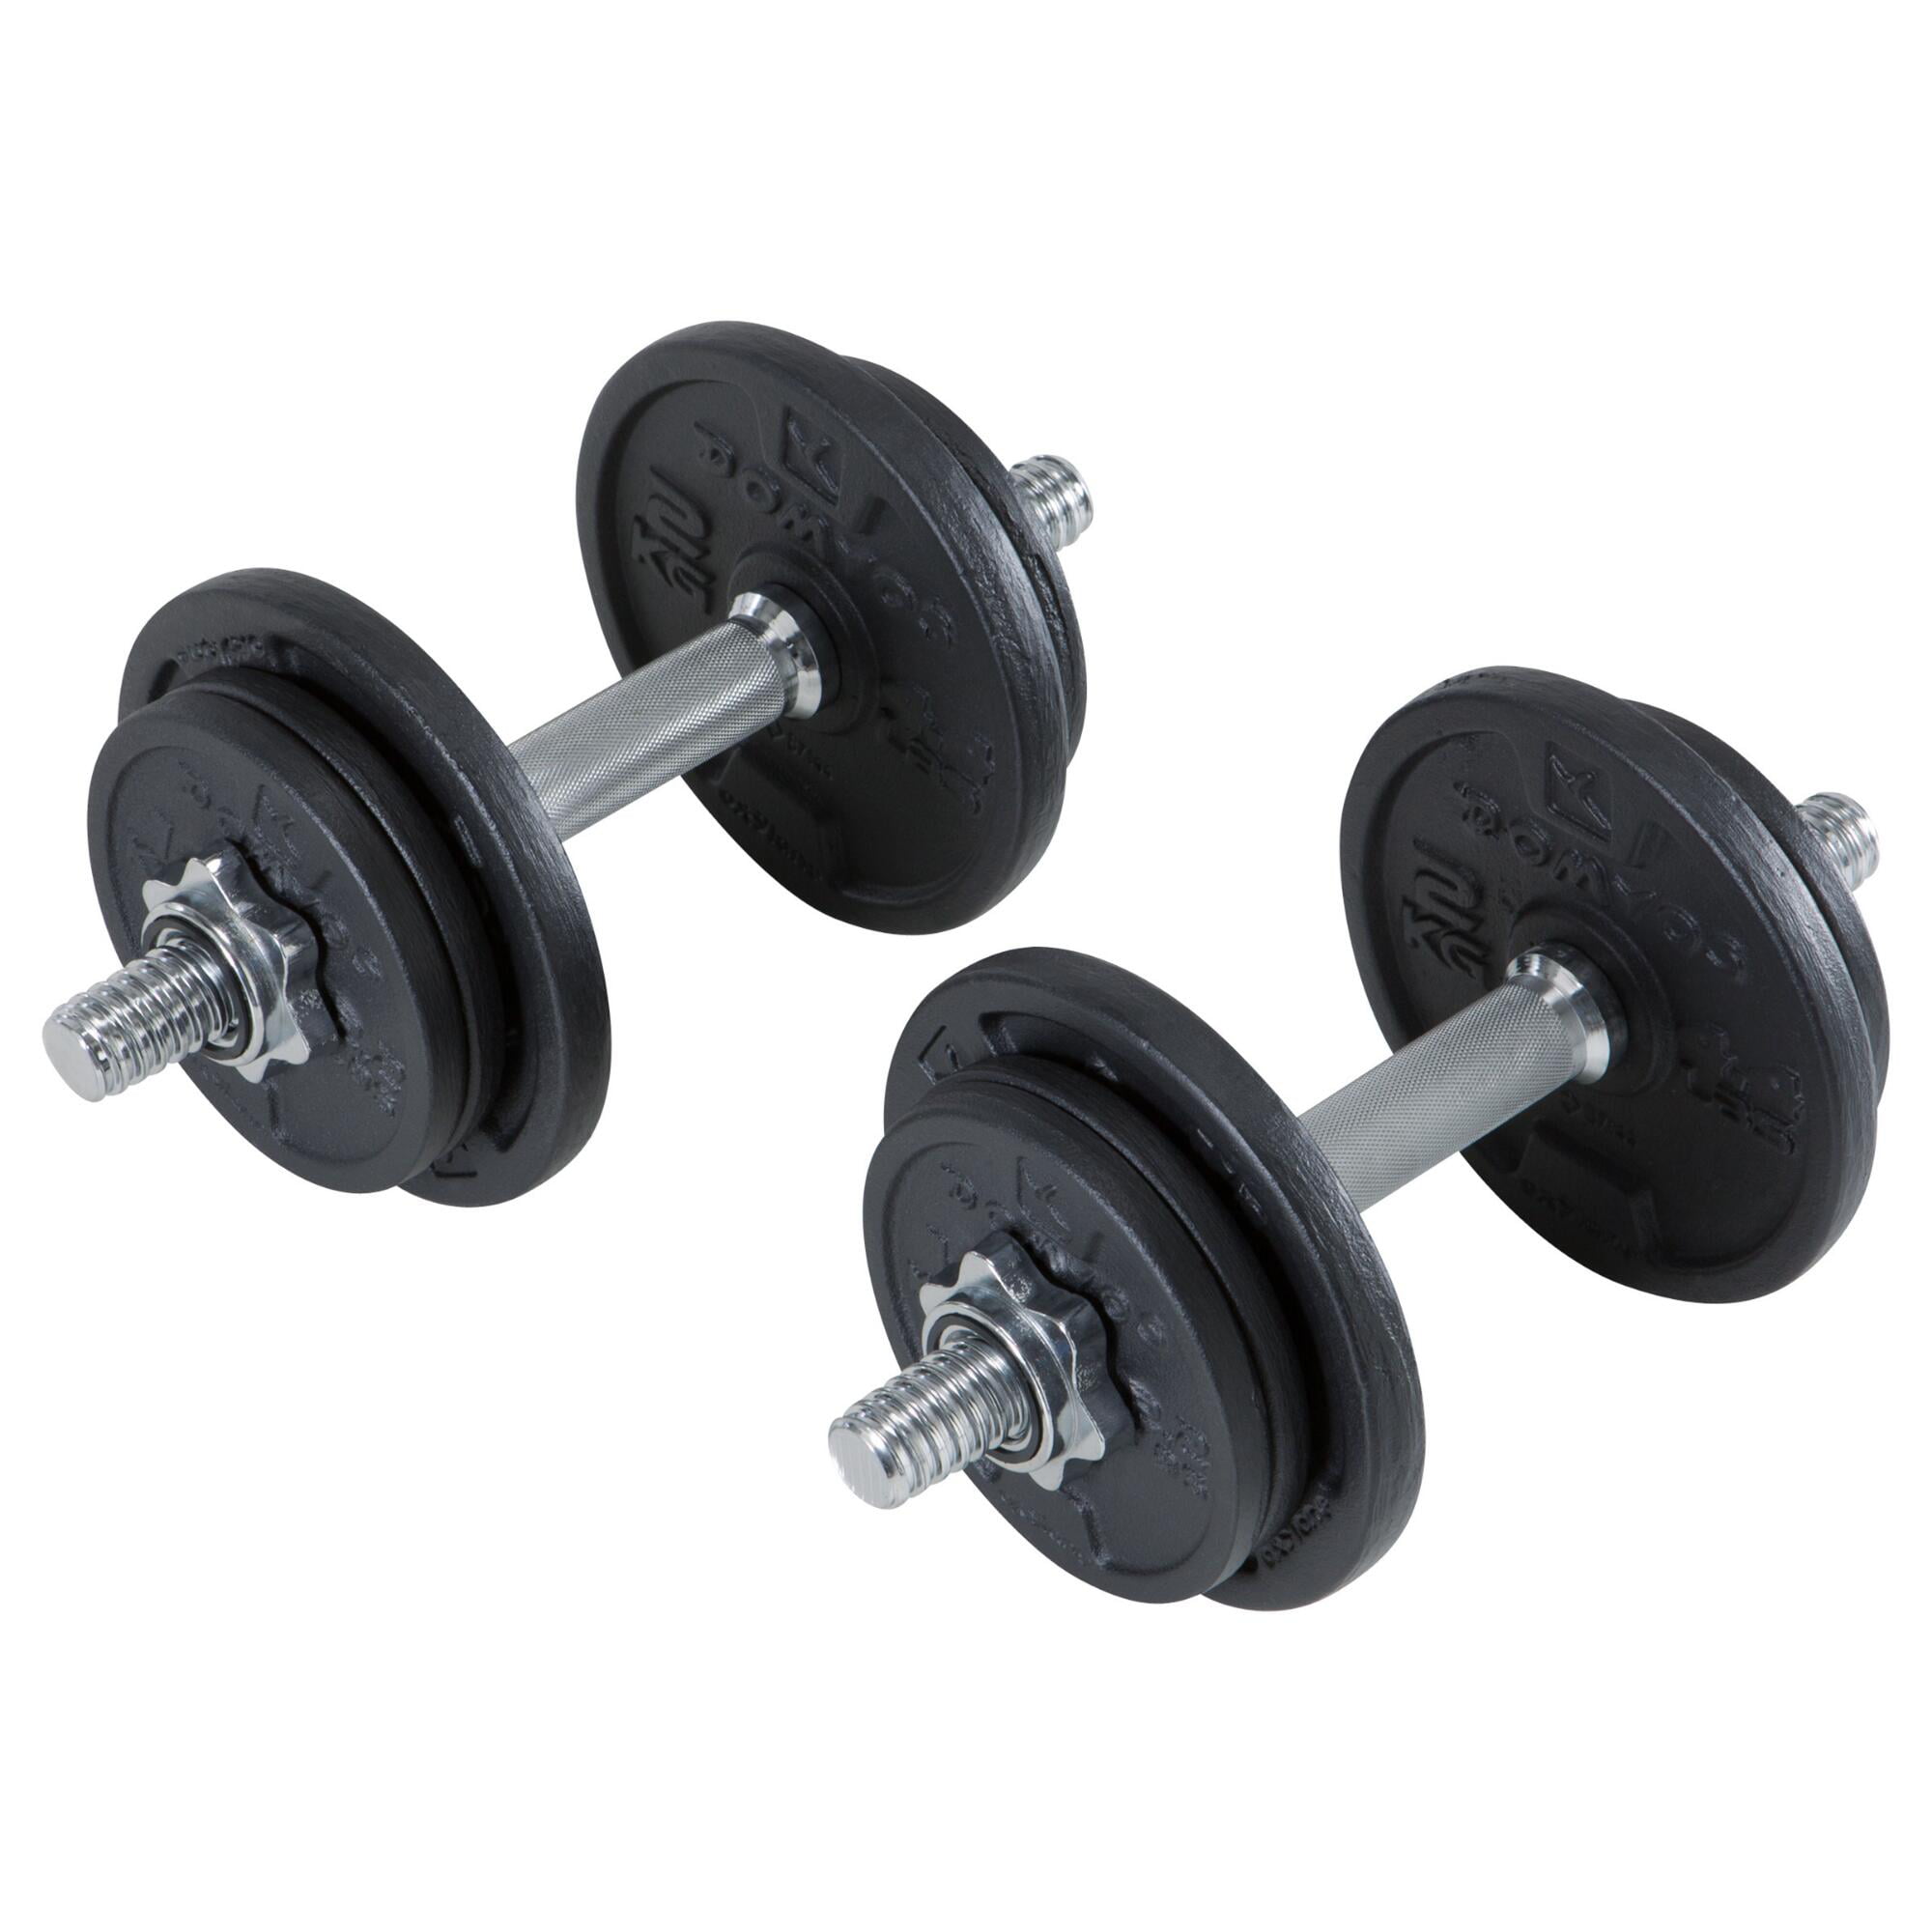 Janice mustard Revocation Decathlon Adjustable Strength Training Dumbbell Set with Carrying Case, 44  lbs - Walmart.com